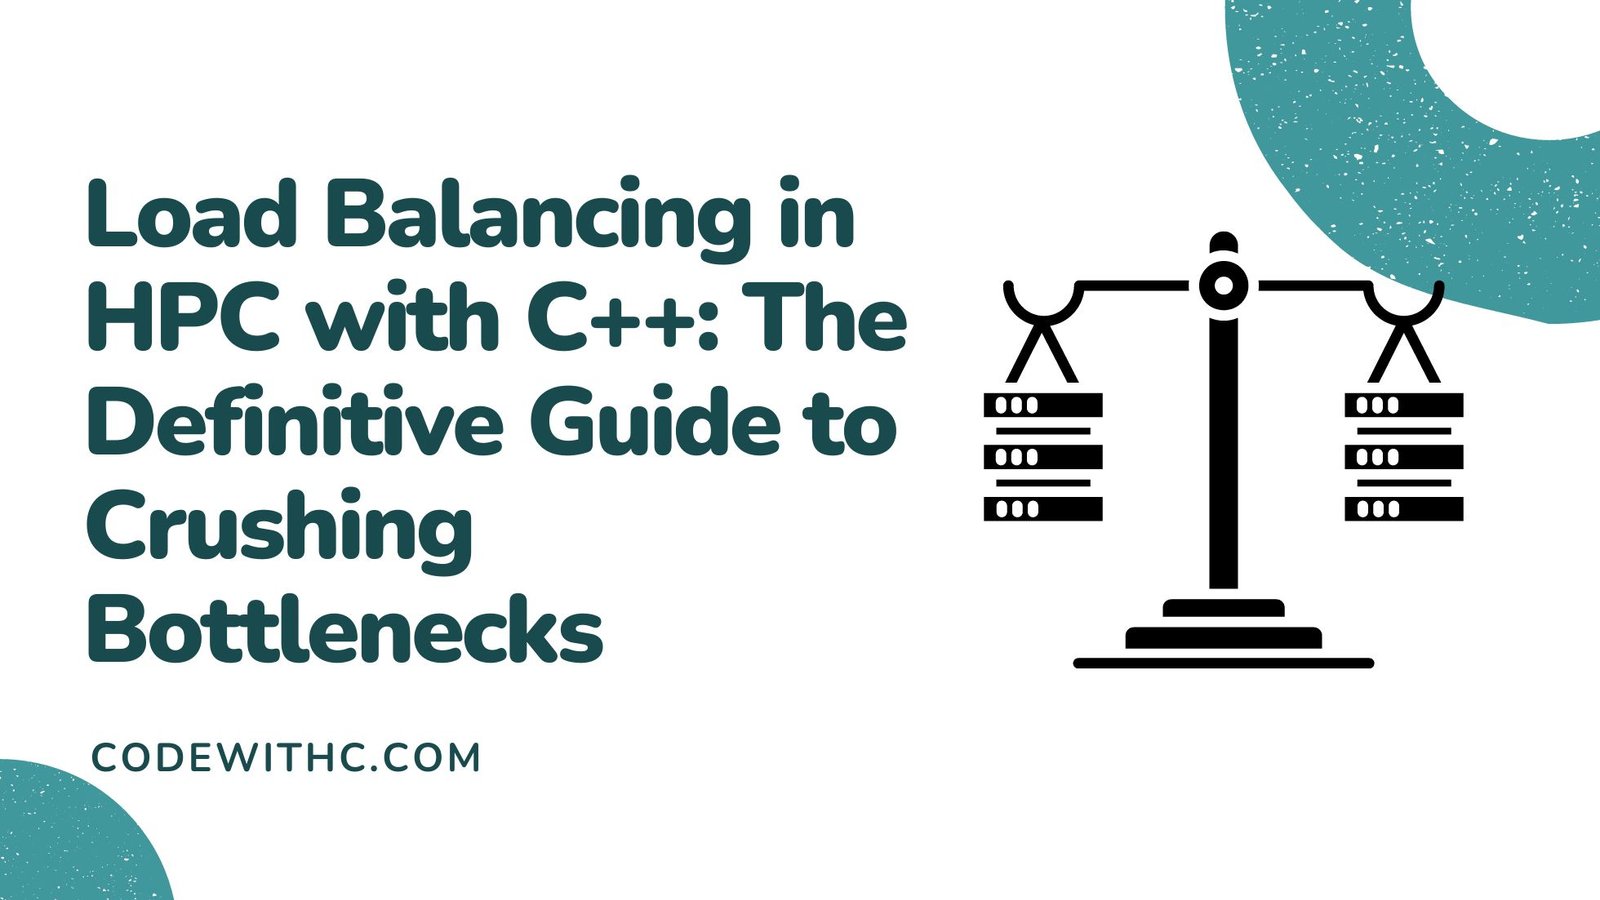 Load Balancing in HPC with C++: The Definitive Guide to Crushing Bottlenecks